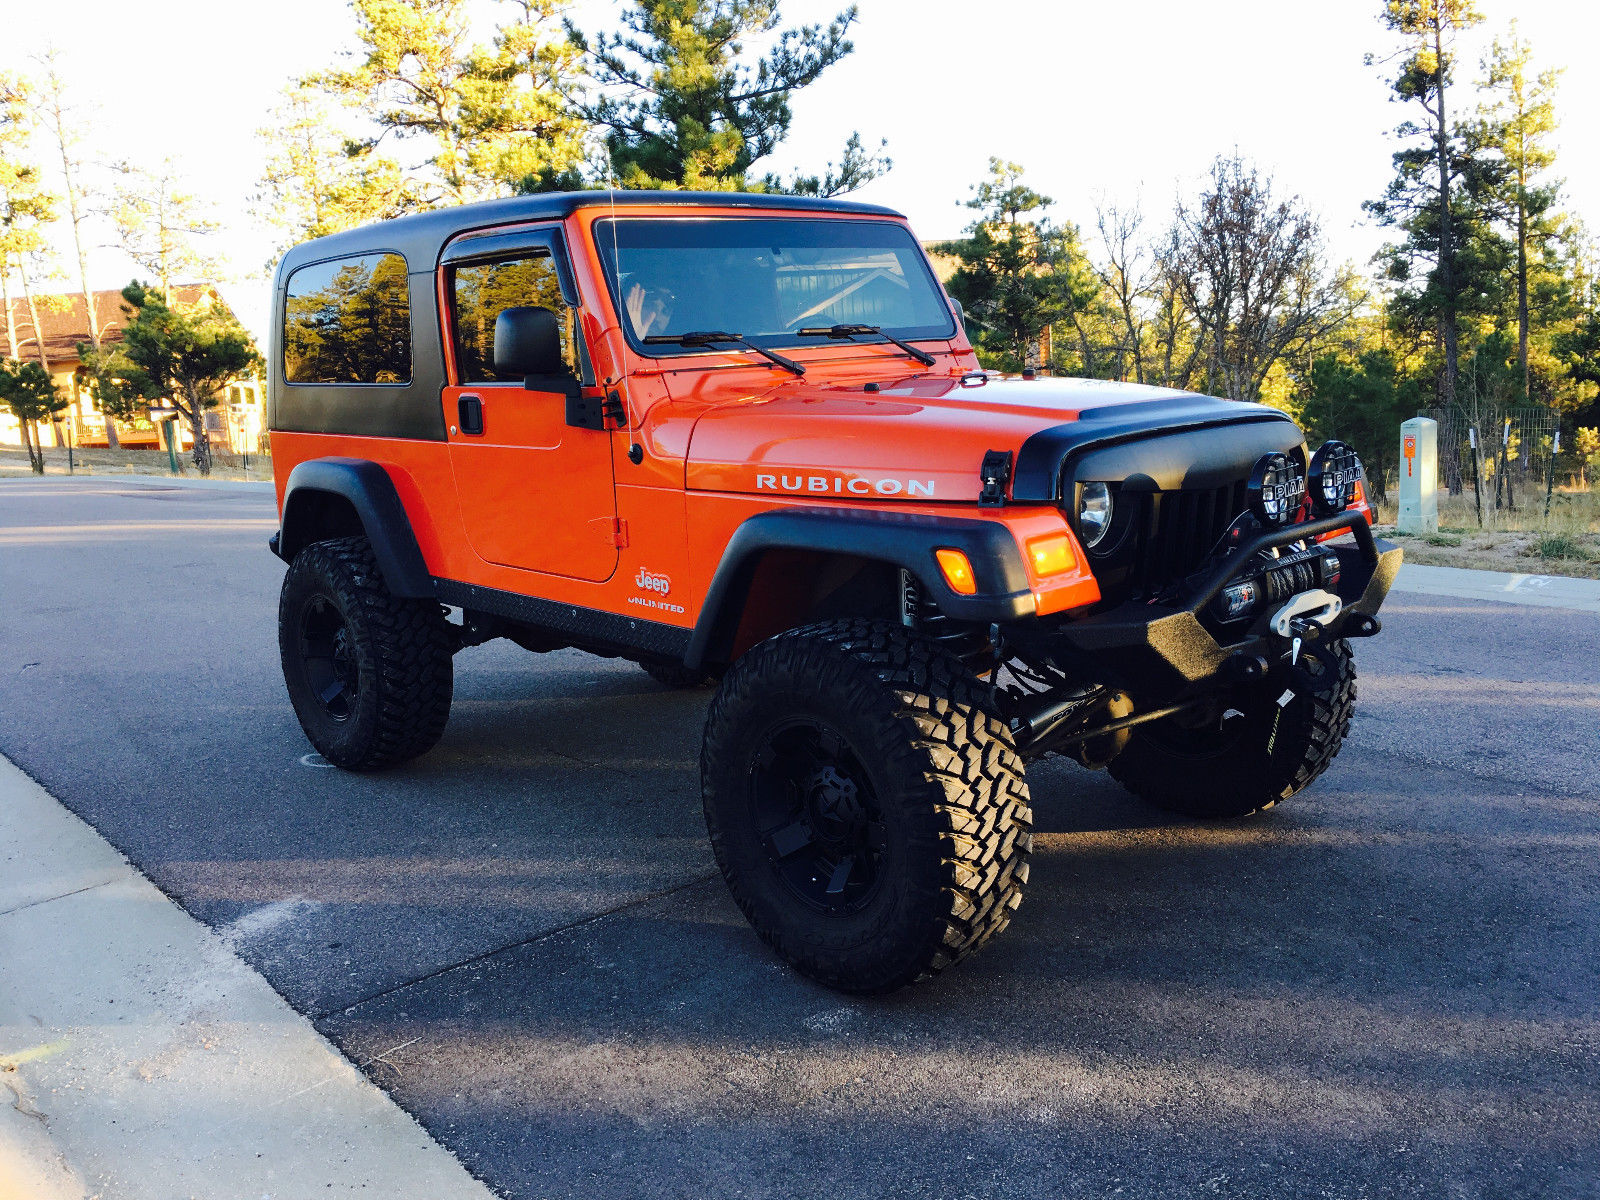 Used 2006 Jeep Wrangler Rubicon 2006 jeep wrangler - Very low miles -  Impact Orange - Fun to drive - Well Built 2022 2023 is in stock and for  sale - Price & Review 2022 2023